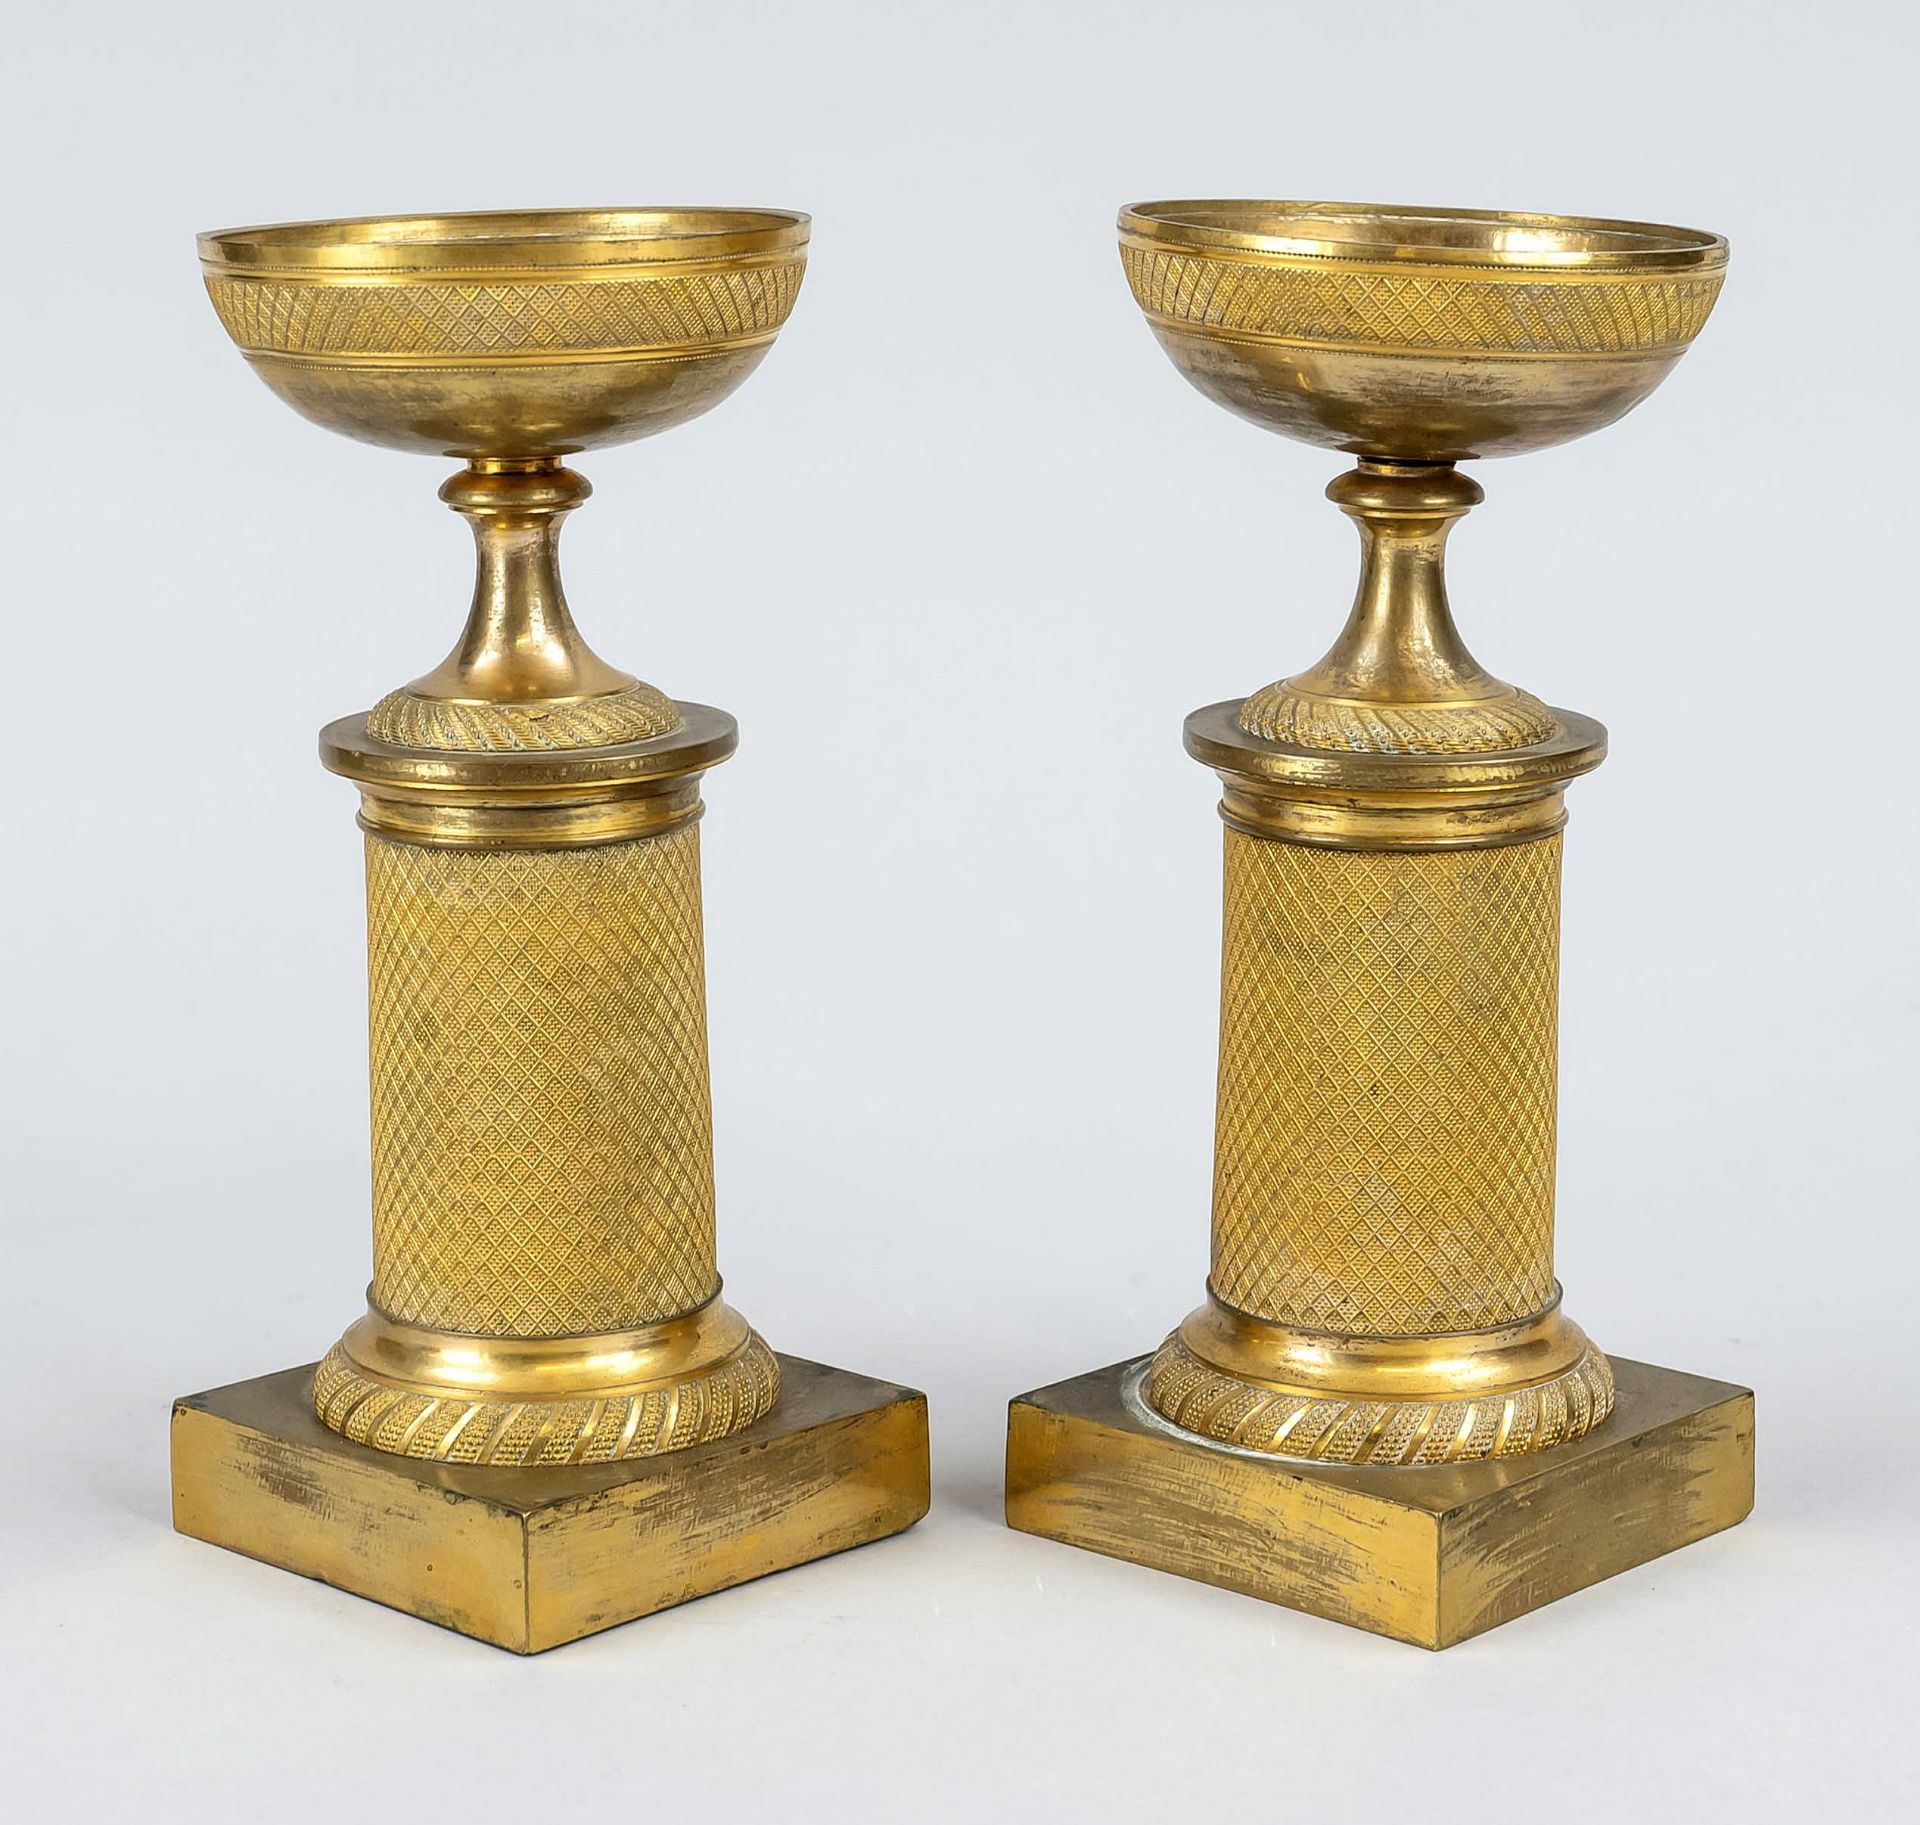 Pair of Empire coupes, France, 1st half of 19th century, fire gilded. Square base, chiselled